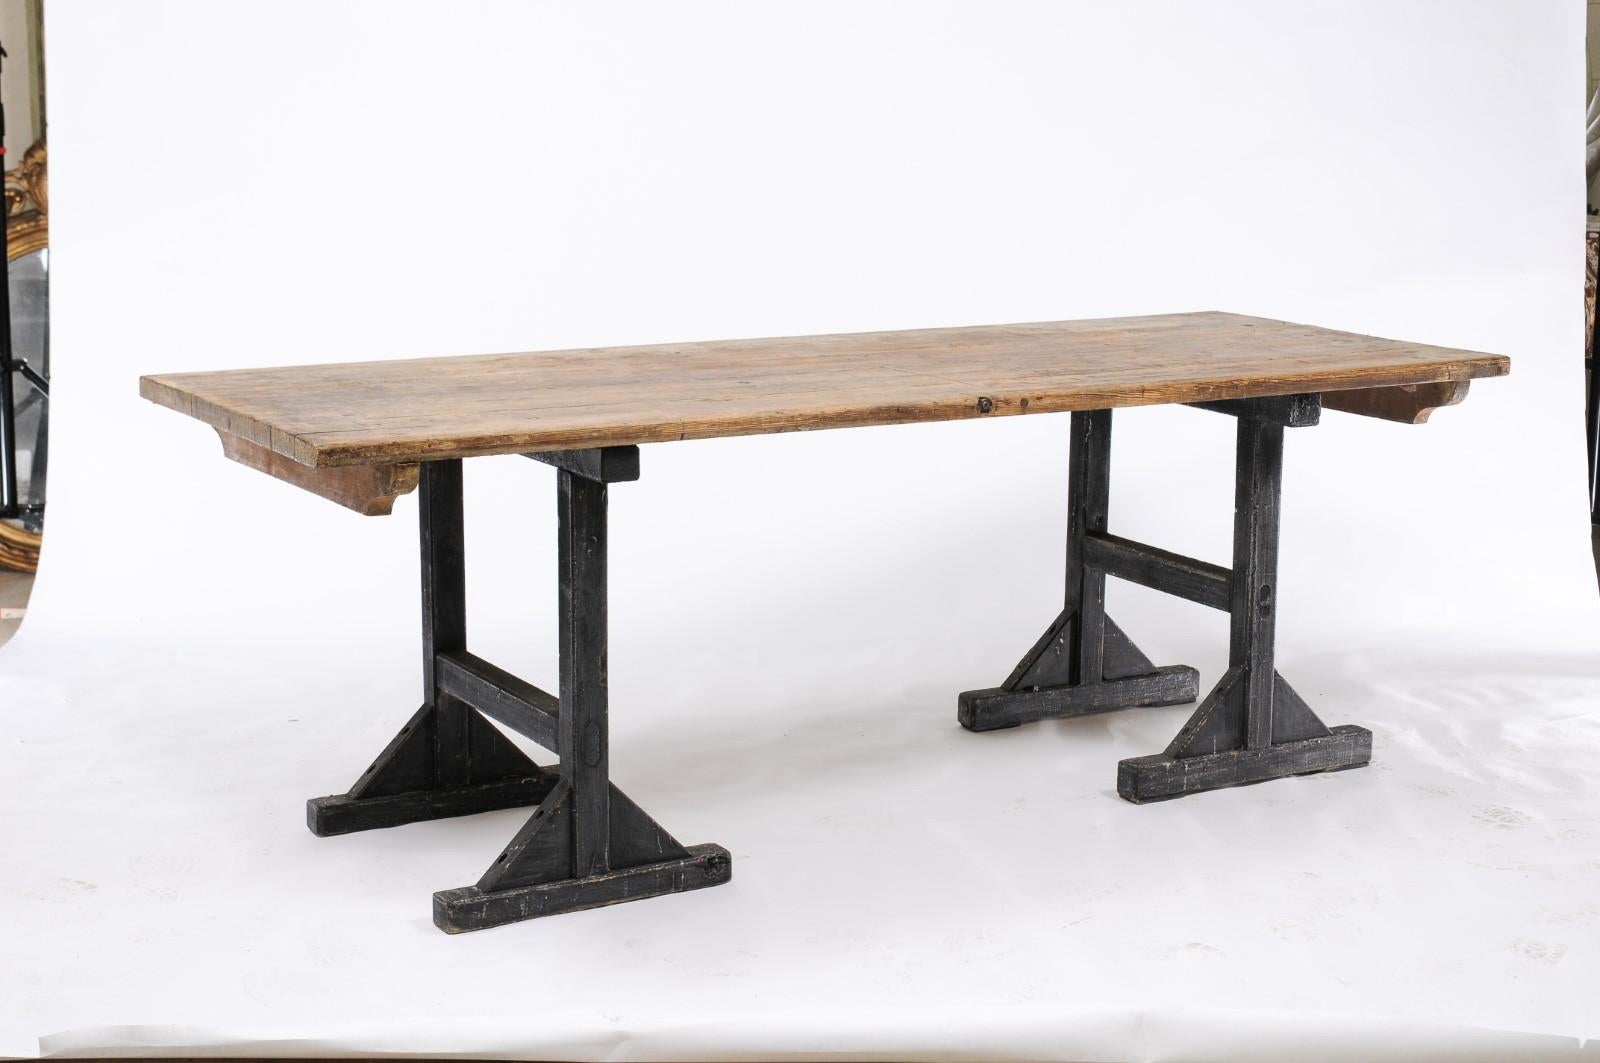 20th Century Northern French Long Pine Work Table with Black-Painted Trestle Base, circa 1920